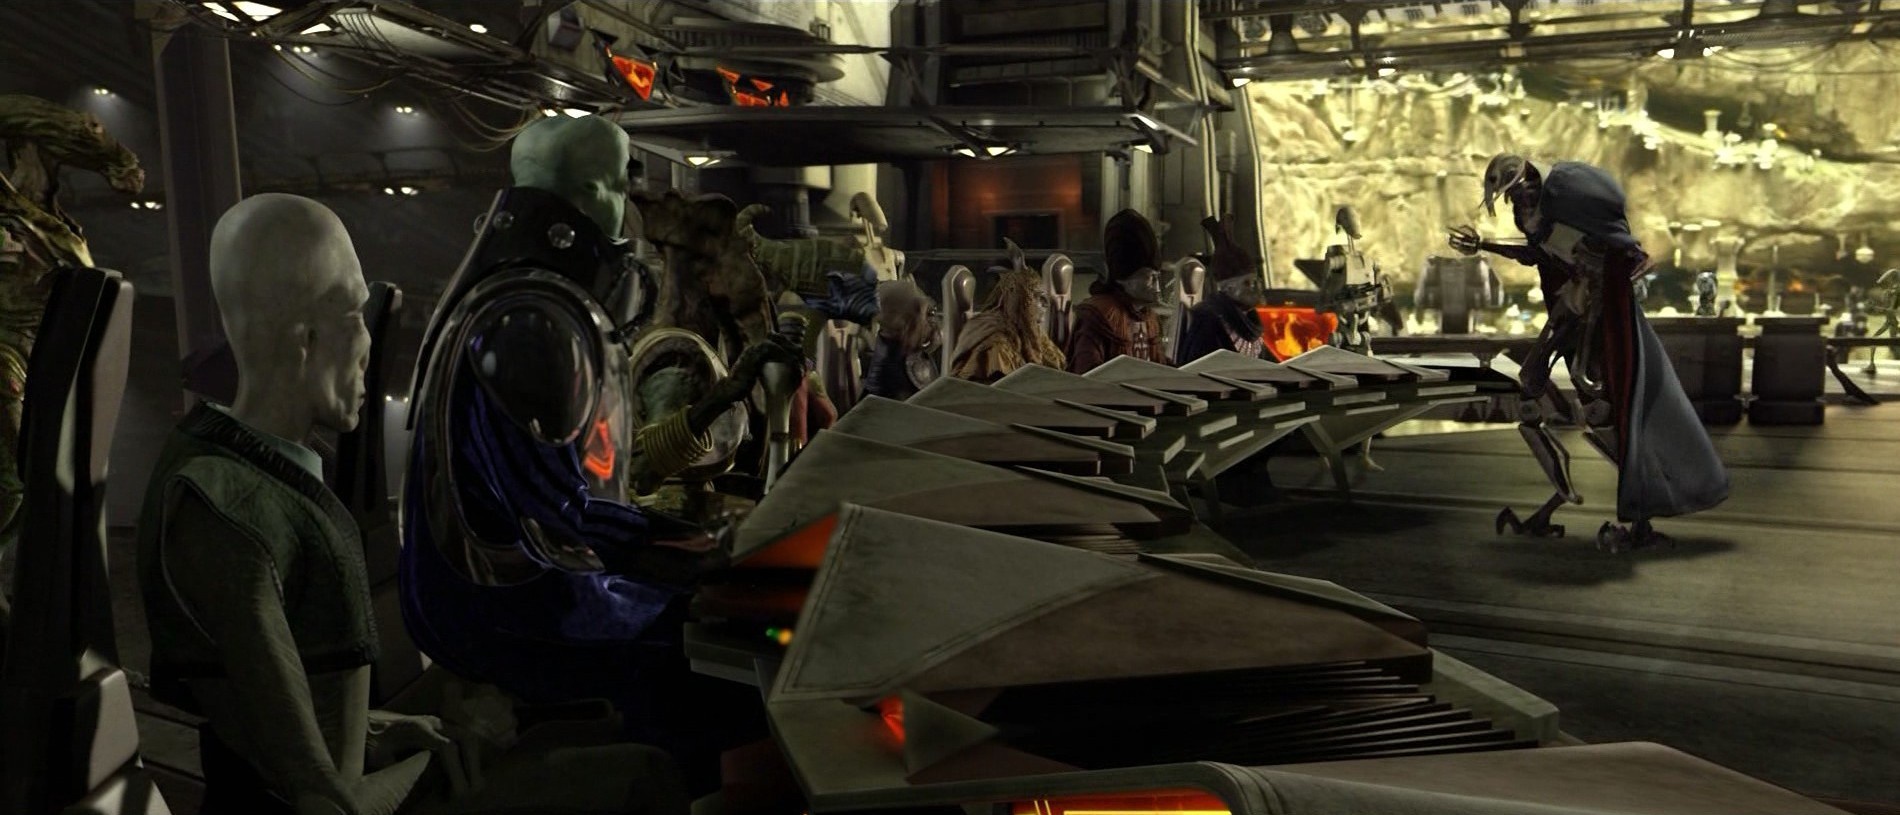 Why were no members of the Separatist council humans other than Dooku?